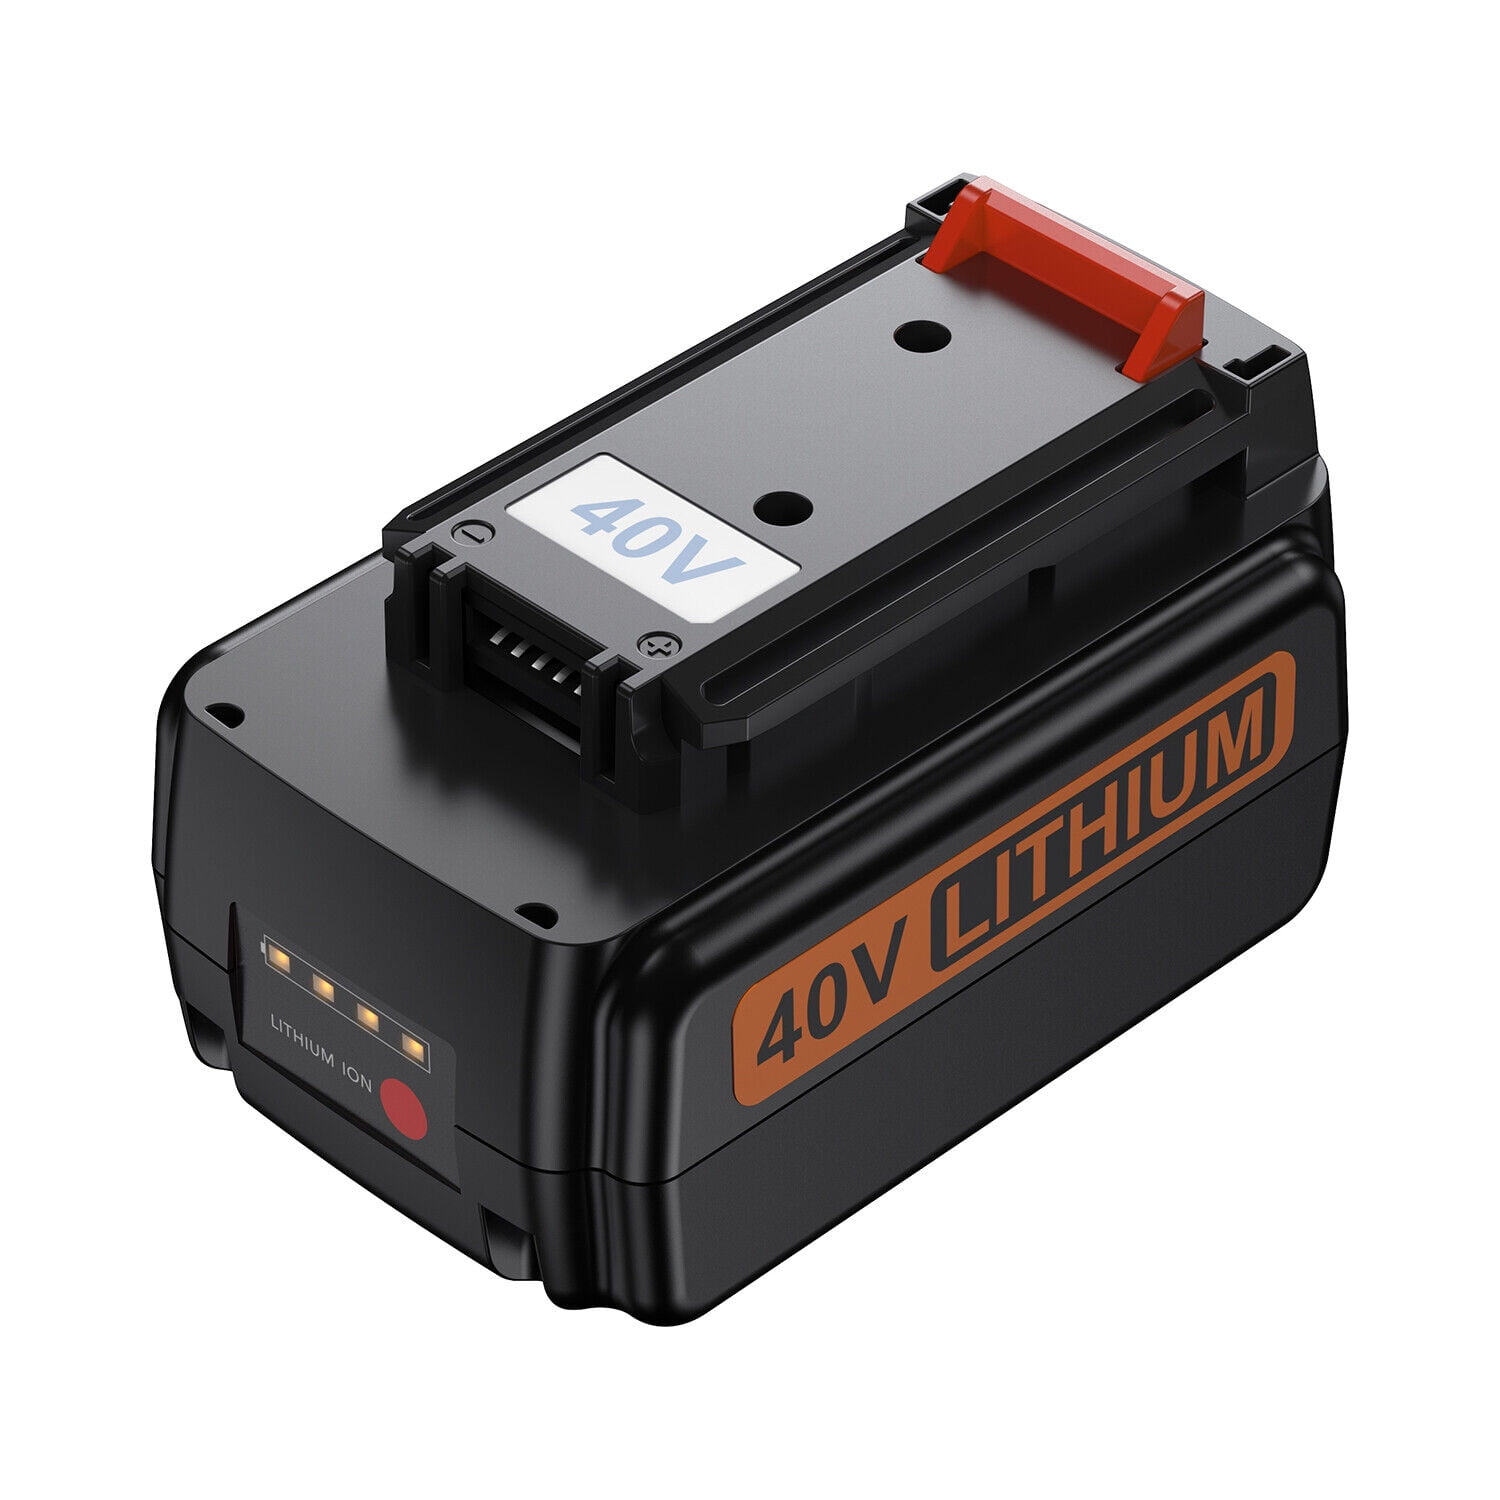 New 3000mAh 36volt lbx2040 replacement battery compatible with black and  Decker 36V lithium battery Max lbx2040 cordless tools